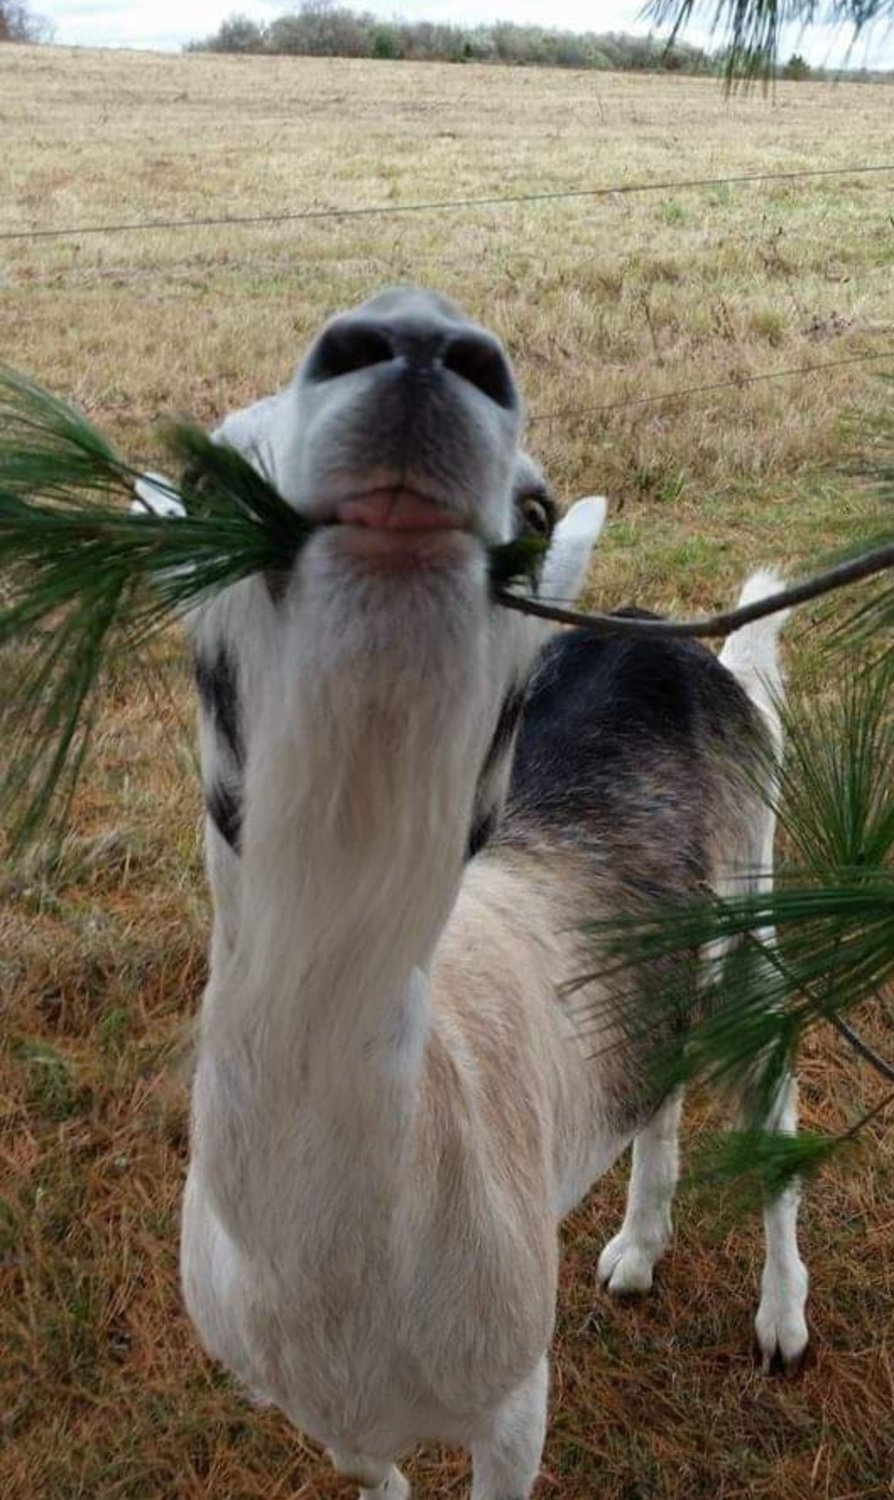 Floyd enjoyed eating all types of snacks. He's munching on some pine needles here. These are safe for goats and donkeys to have in moderation.